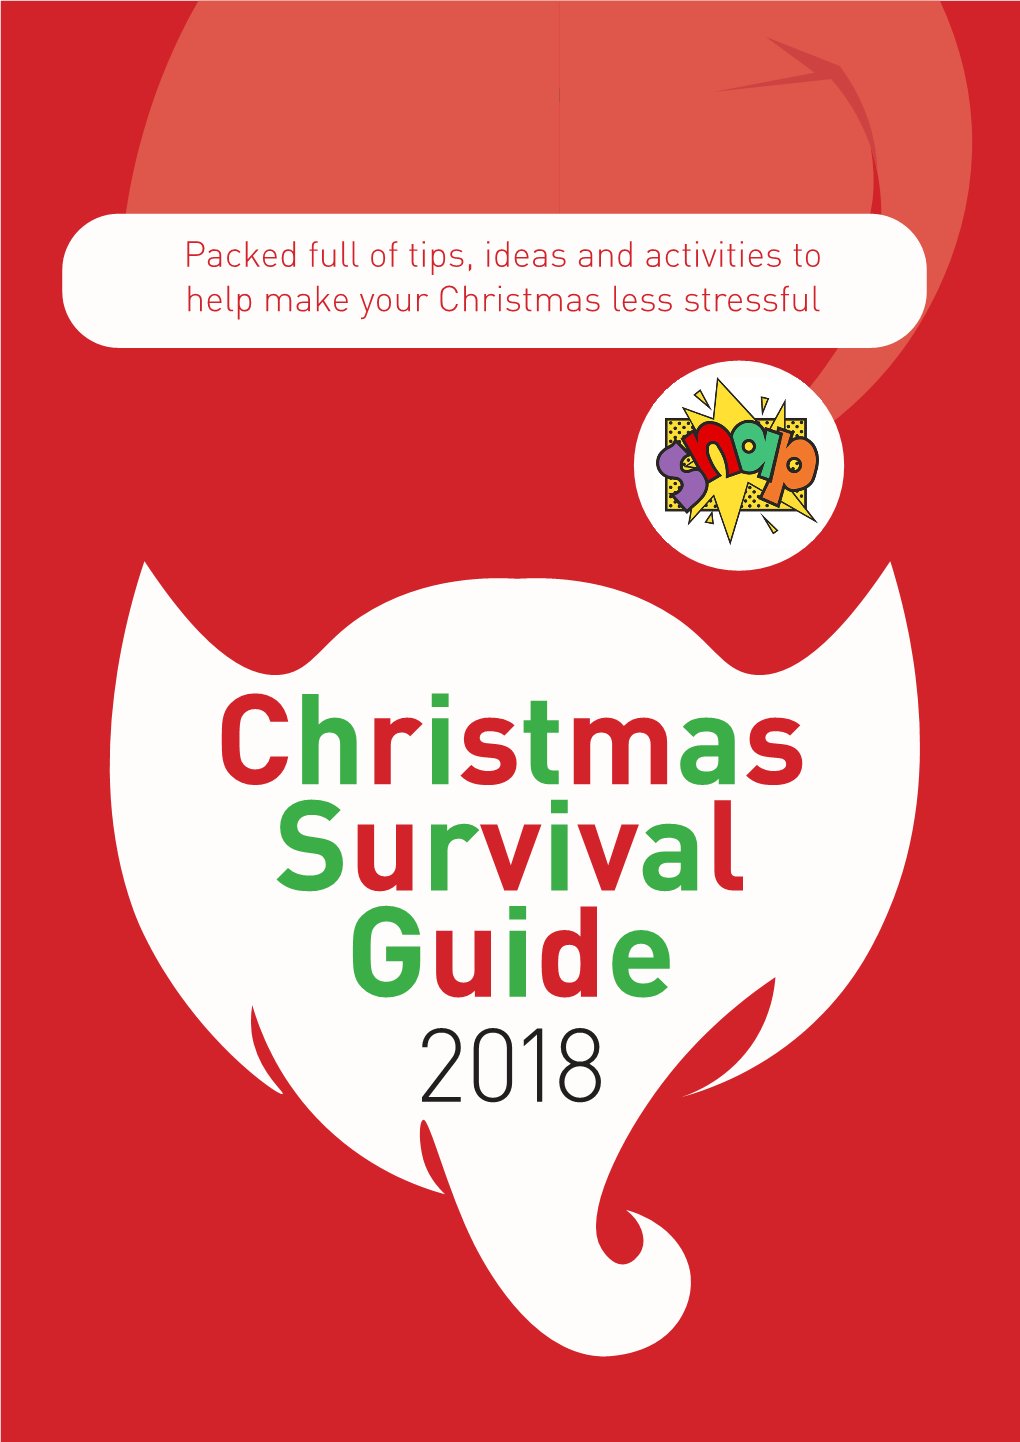 Packed Full of Tips, Ideas and Activities to Help Make Your Christmas Less Stressful